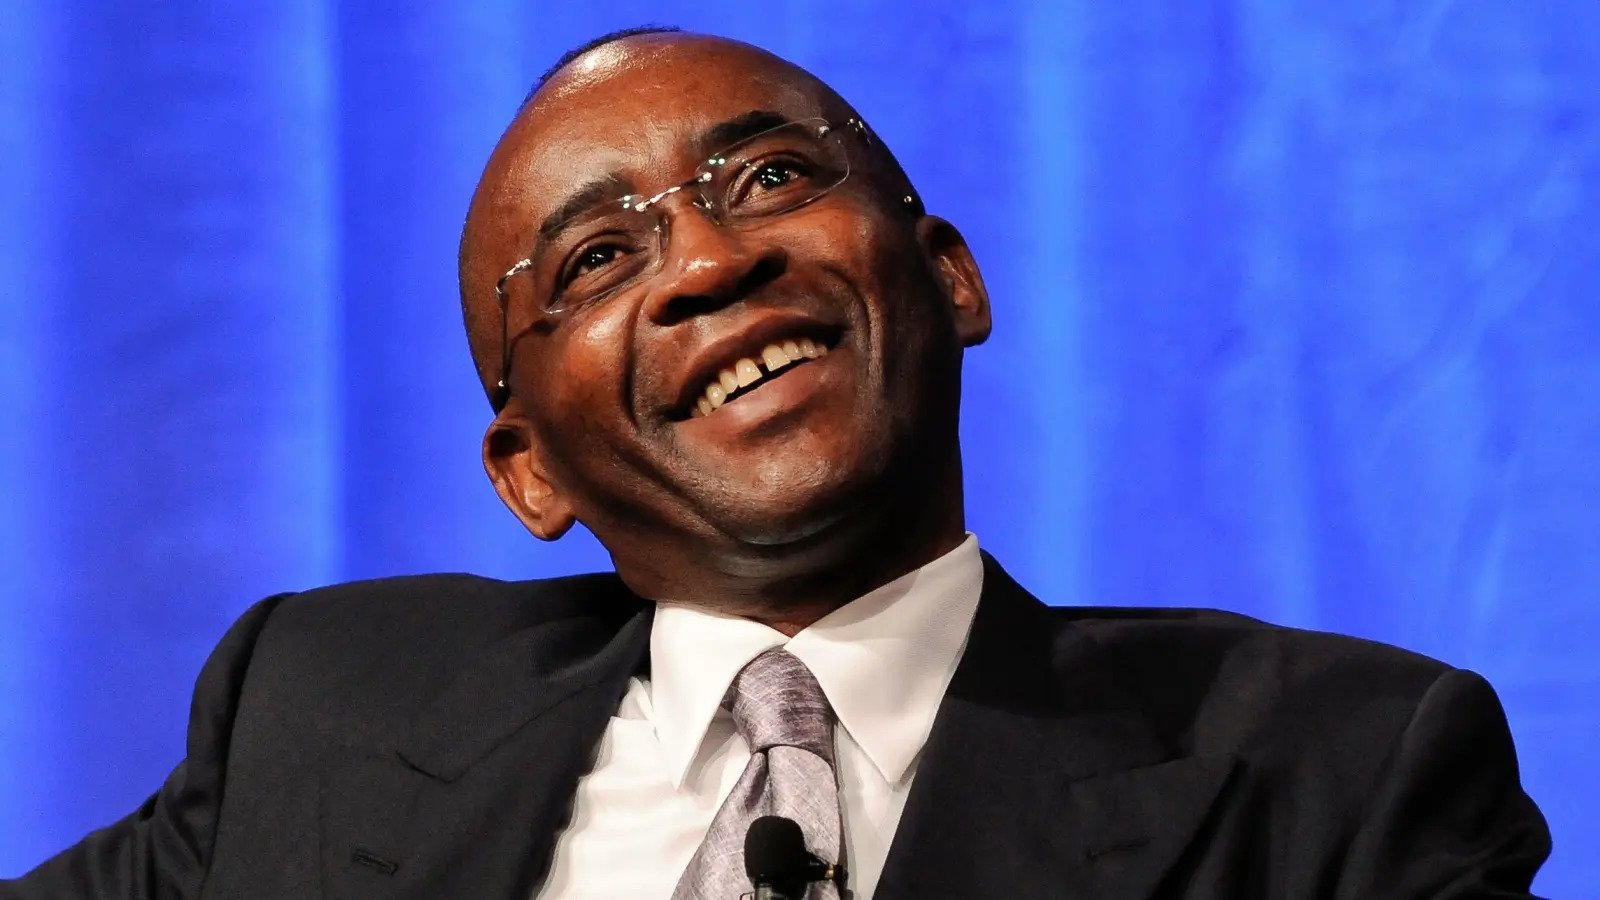 Strive Masiyiwa surpasses Patrice Motsepe to become the richest black man in Southern Africa